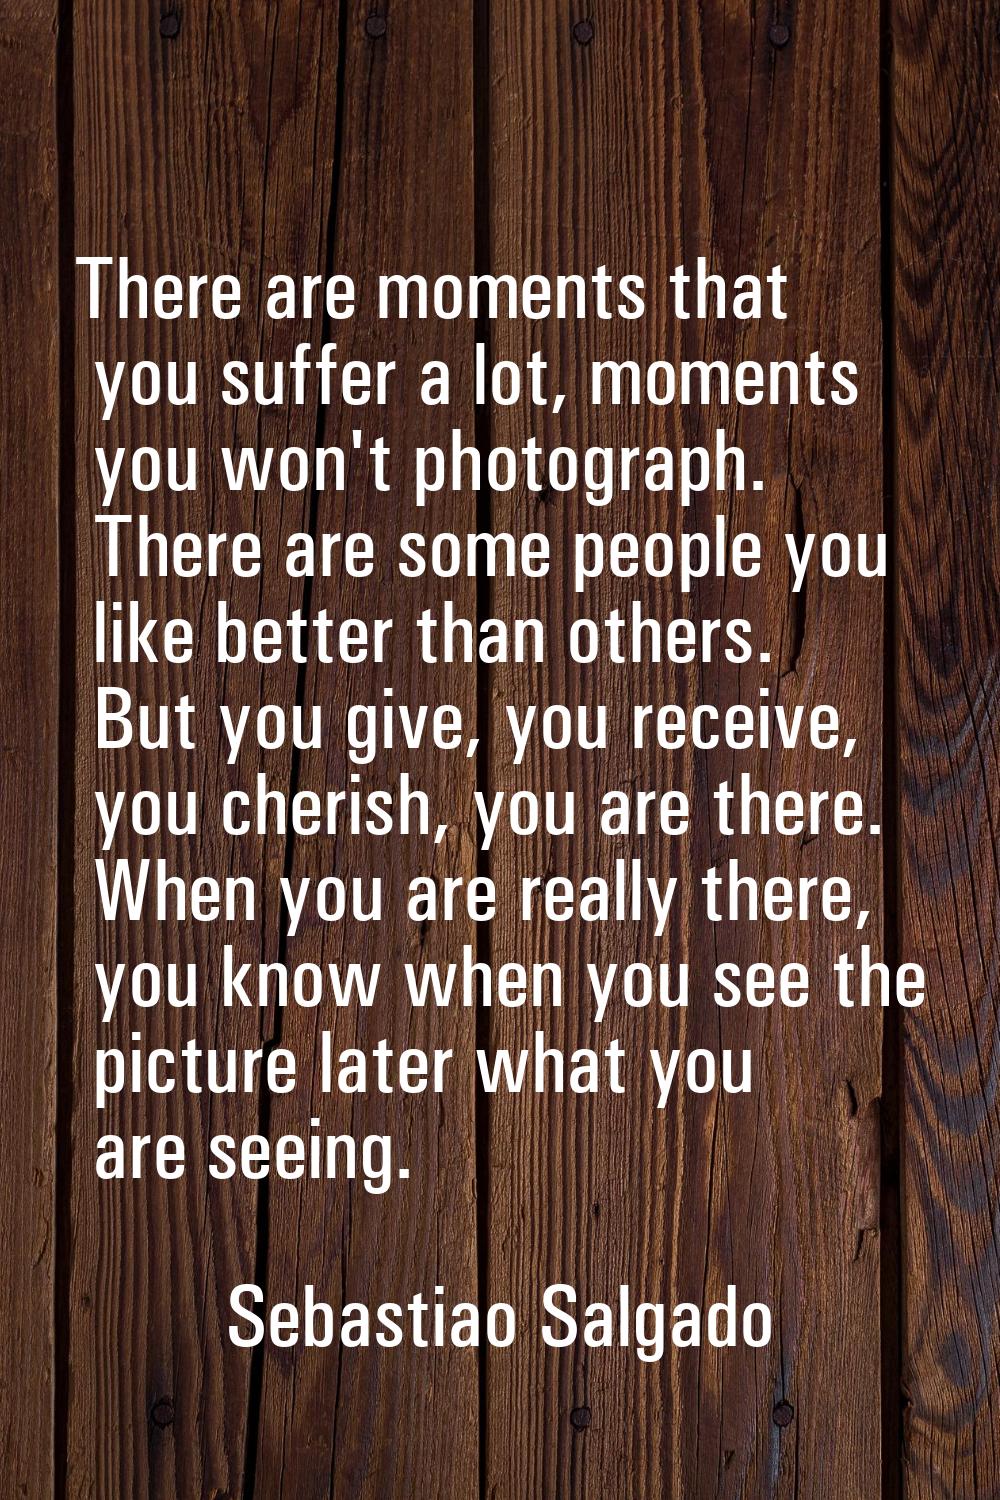 There are moments that you suffer a lot, moments you won't photograph. There are some people you li